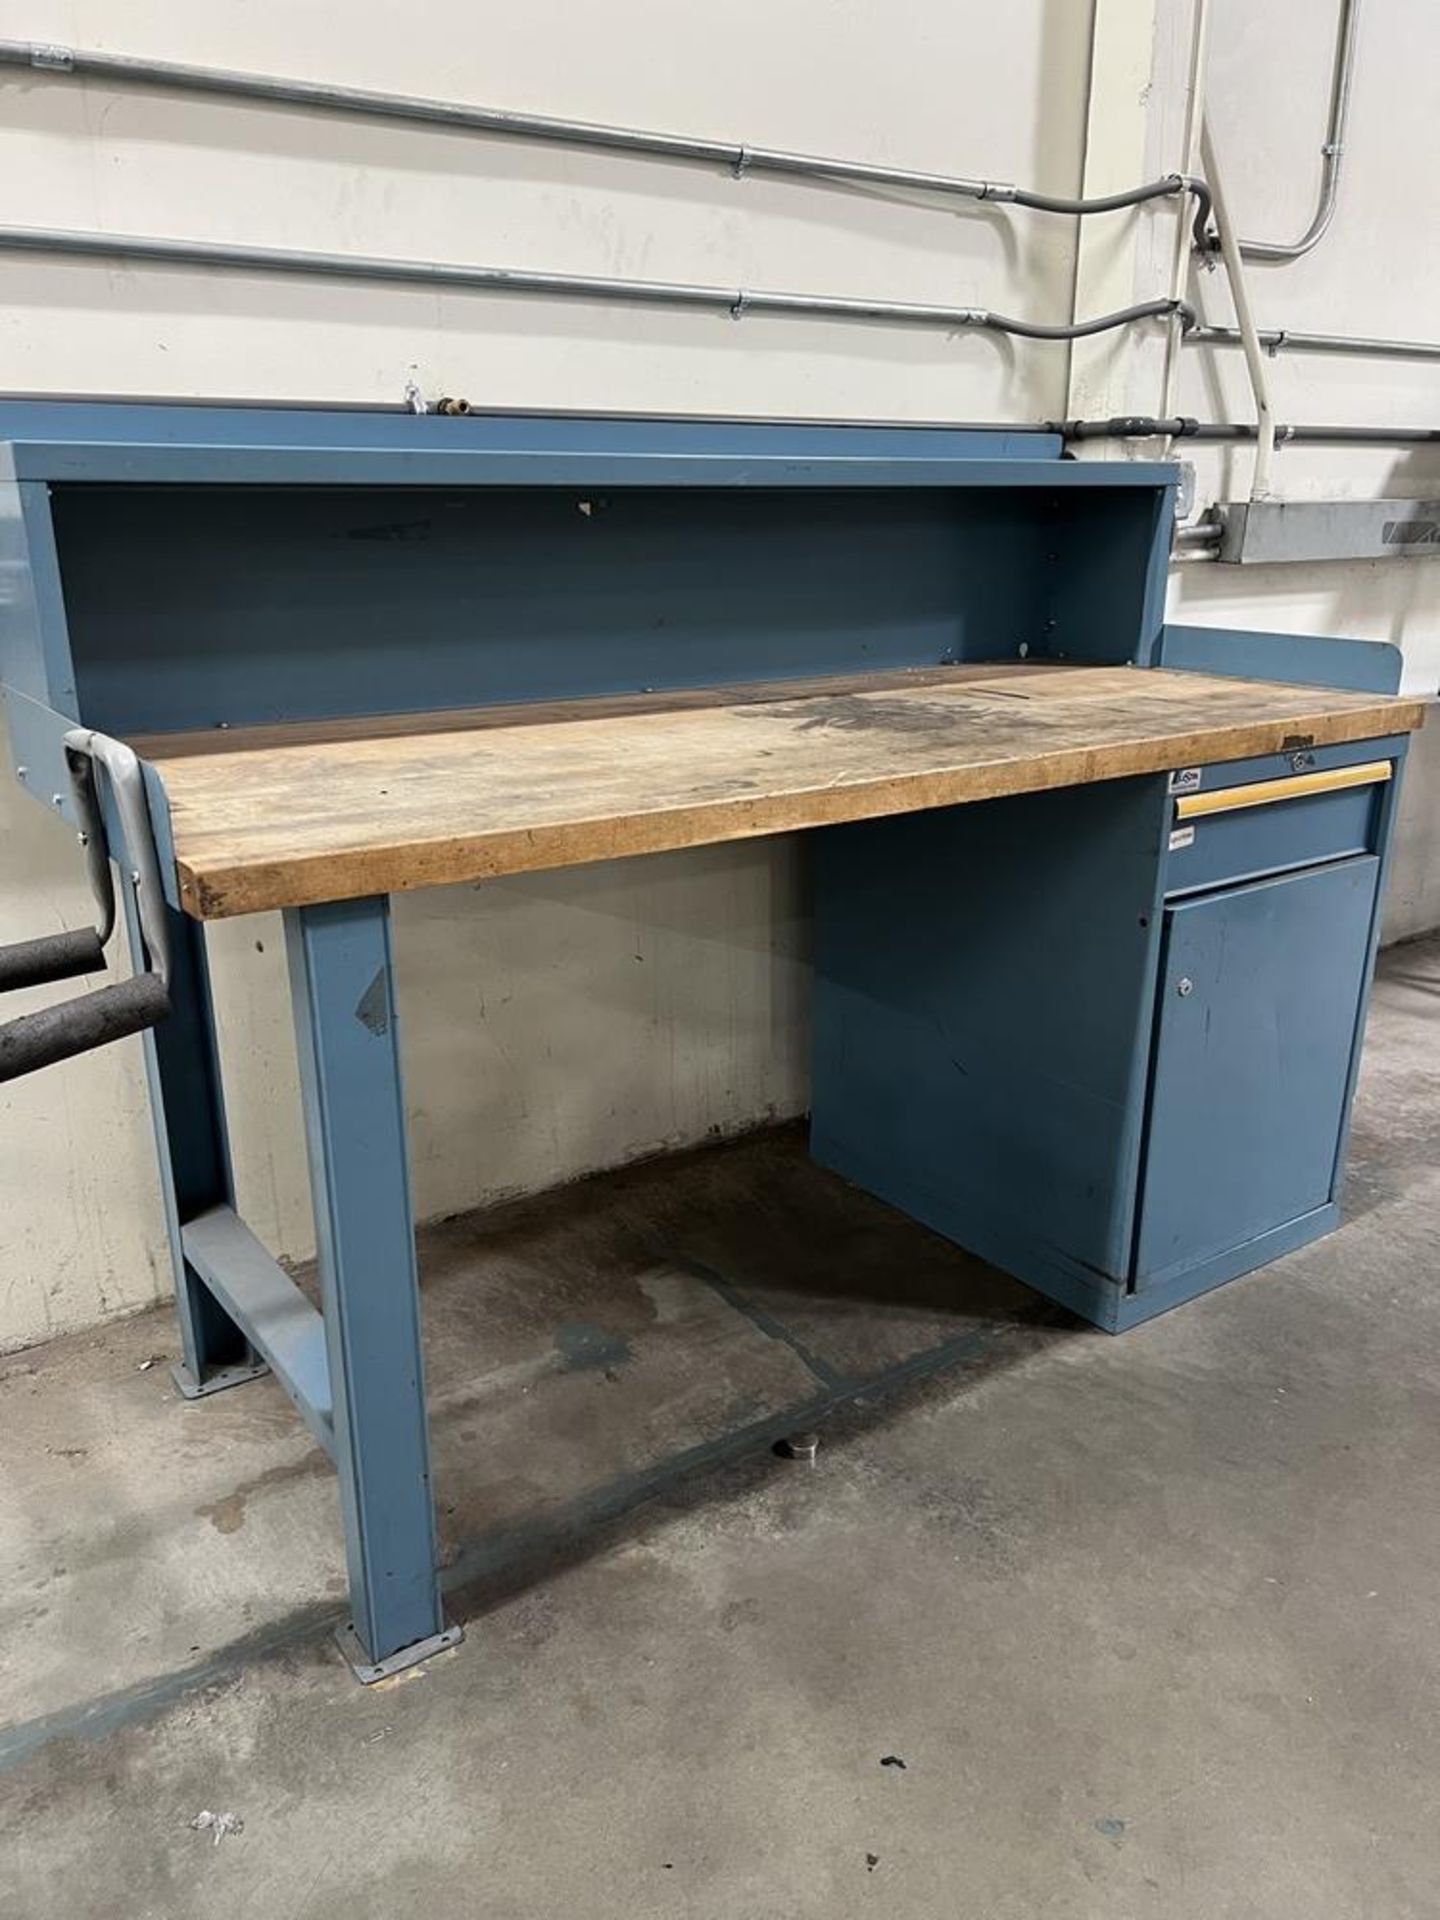 Lista 2 Tier Work Bench With Cabinet & Drawer 72" x 30" x36" - Image 2 of 5